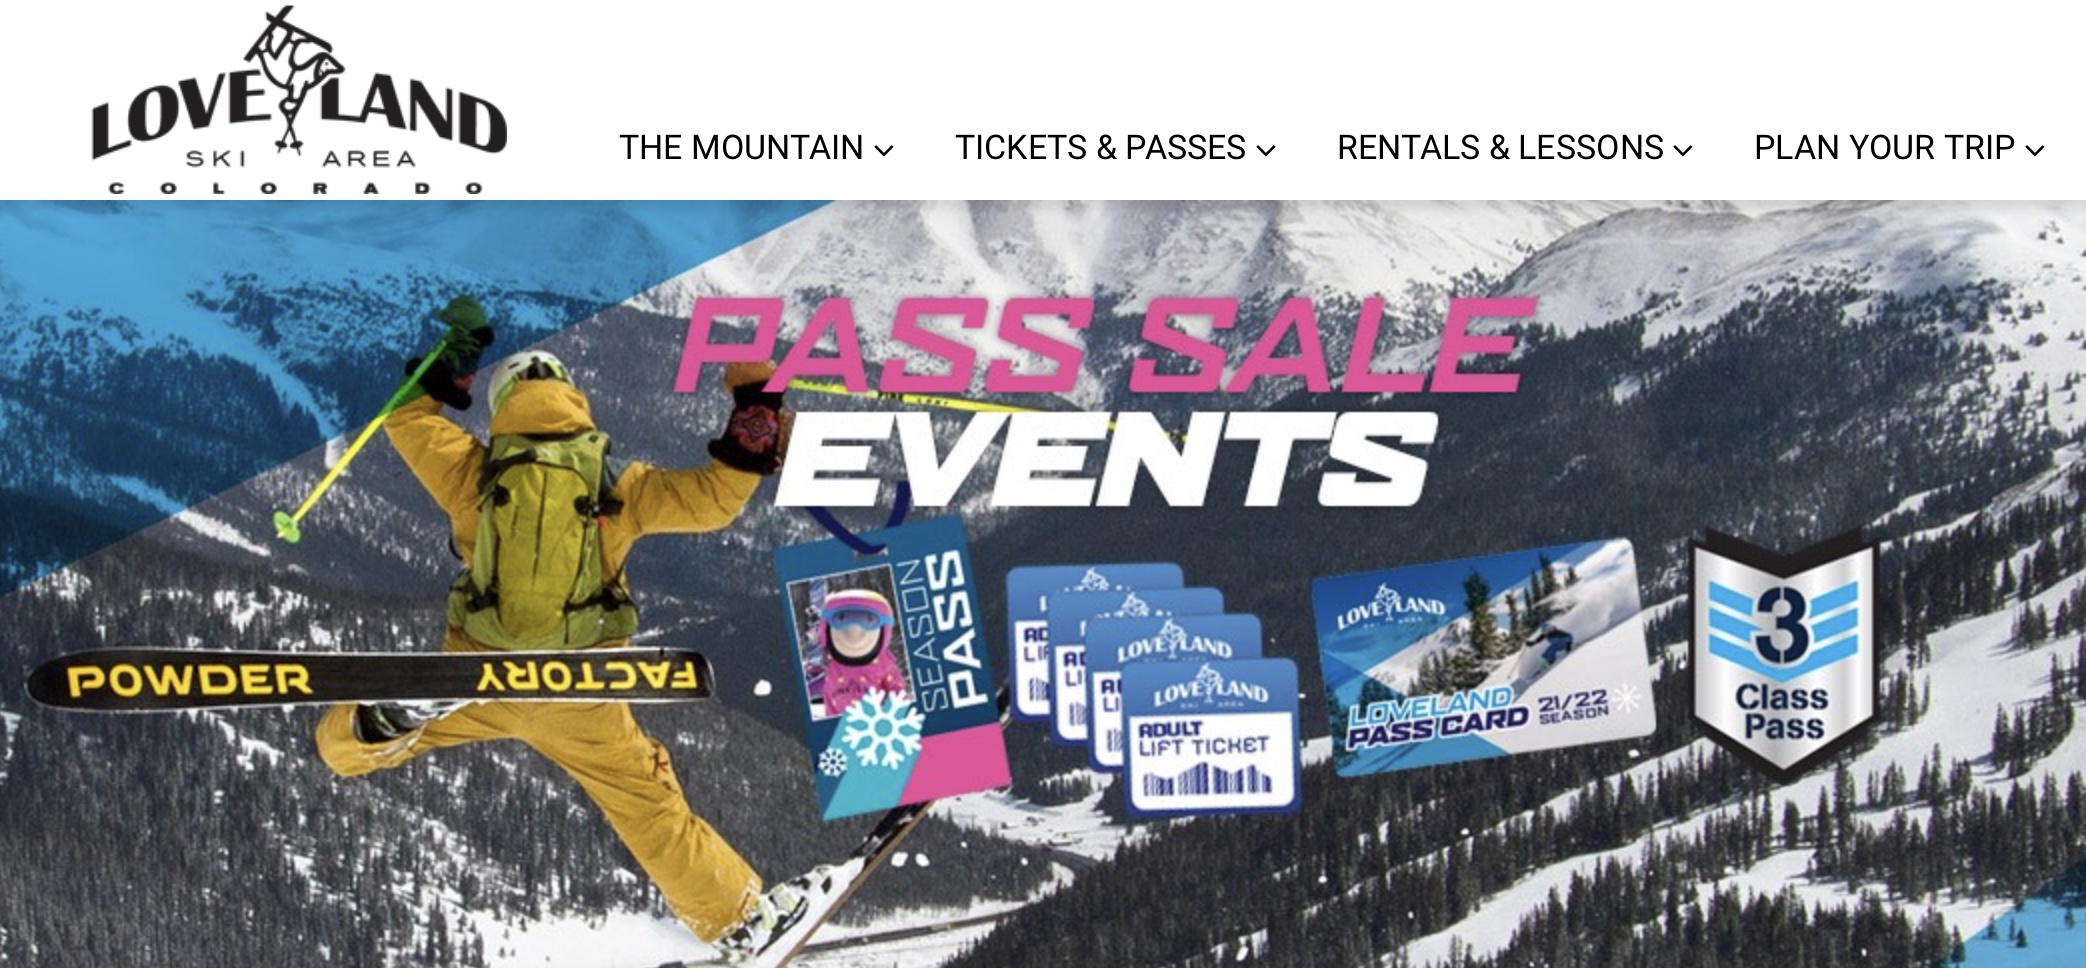 Ski graphic showing a jumping skier and the Loveland Ski Area 4 Lift ticket packs and season pass options.